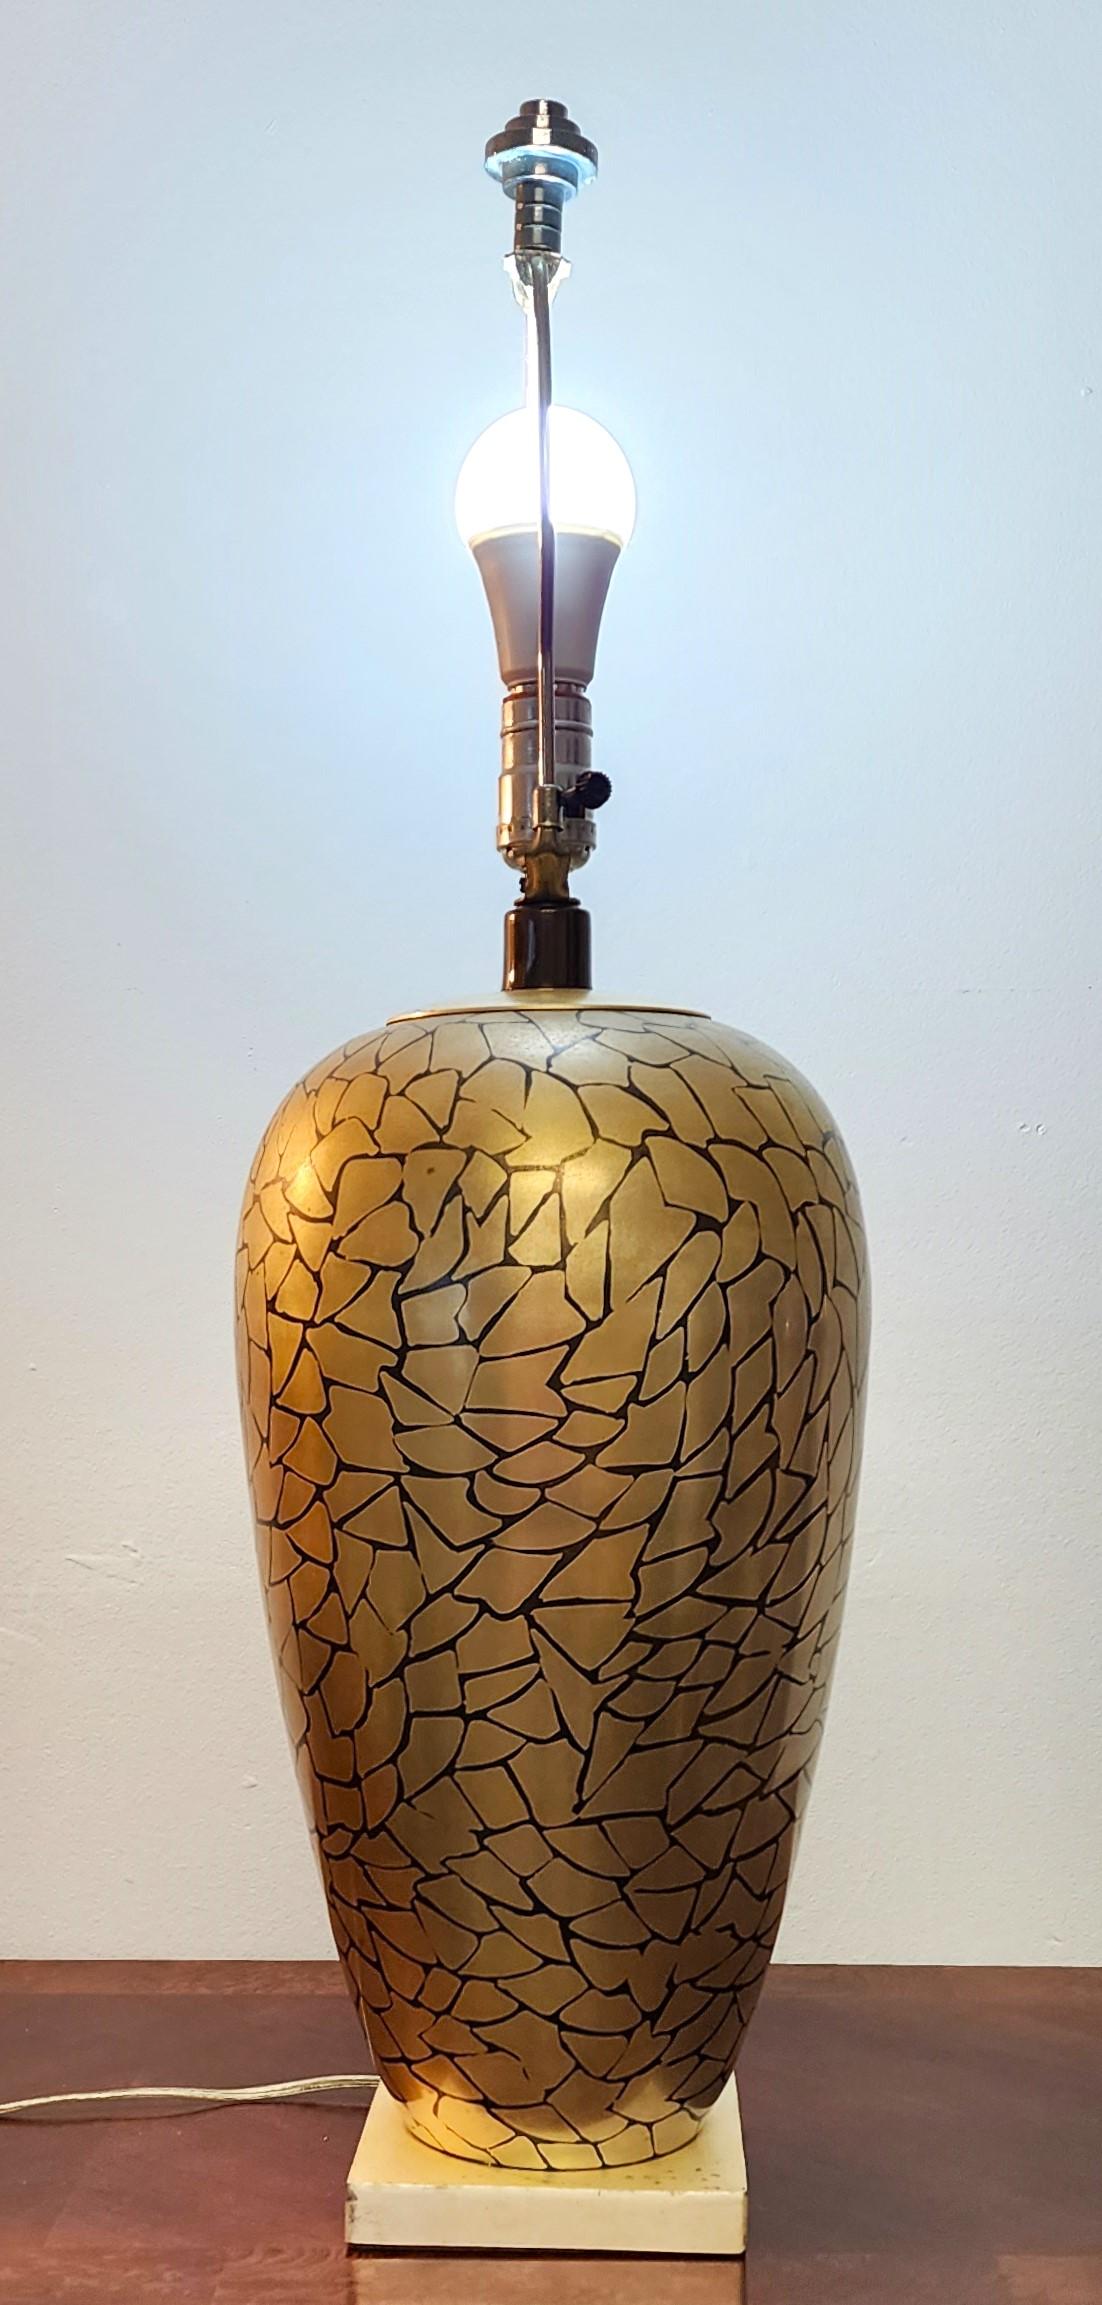 For FULL item description click on CONTINUE READING at the bottom of this page.
Offering One Of Our Recent Palm Beach Estate Fine Lighting Acquisitions Of A
1980s JAY SPECTRE for PAUL HANSON DINANDERIE TABLE LAMP

We have 2 other Spectre lamps